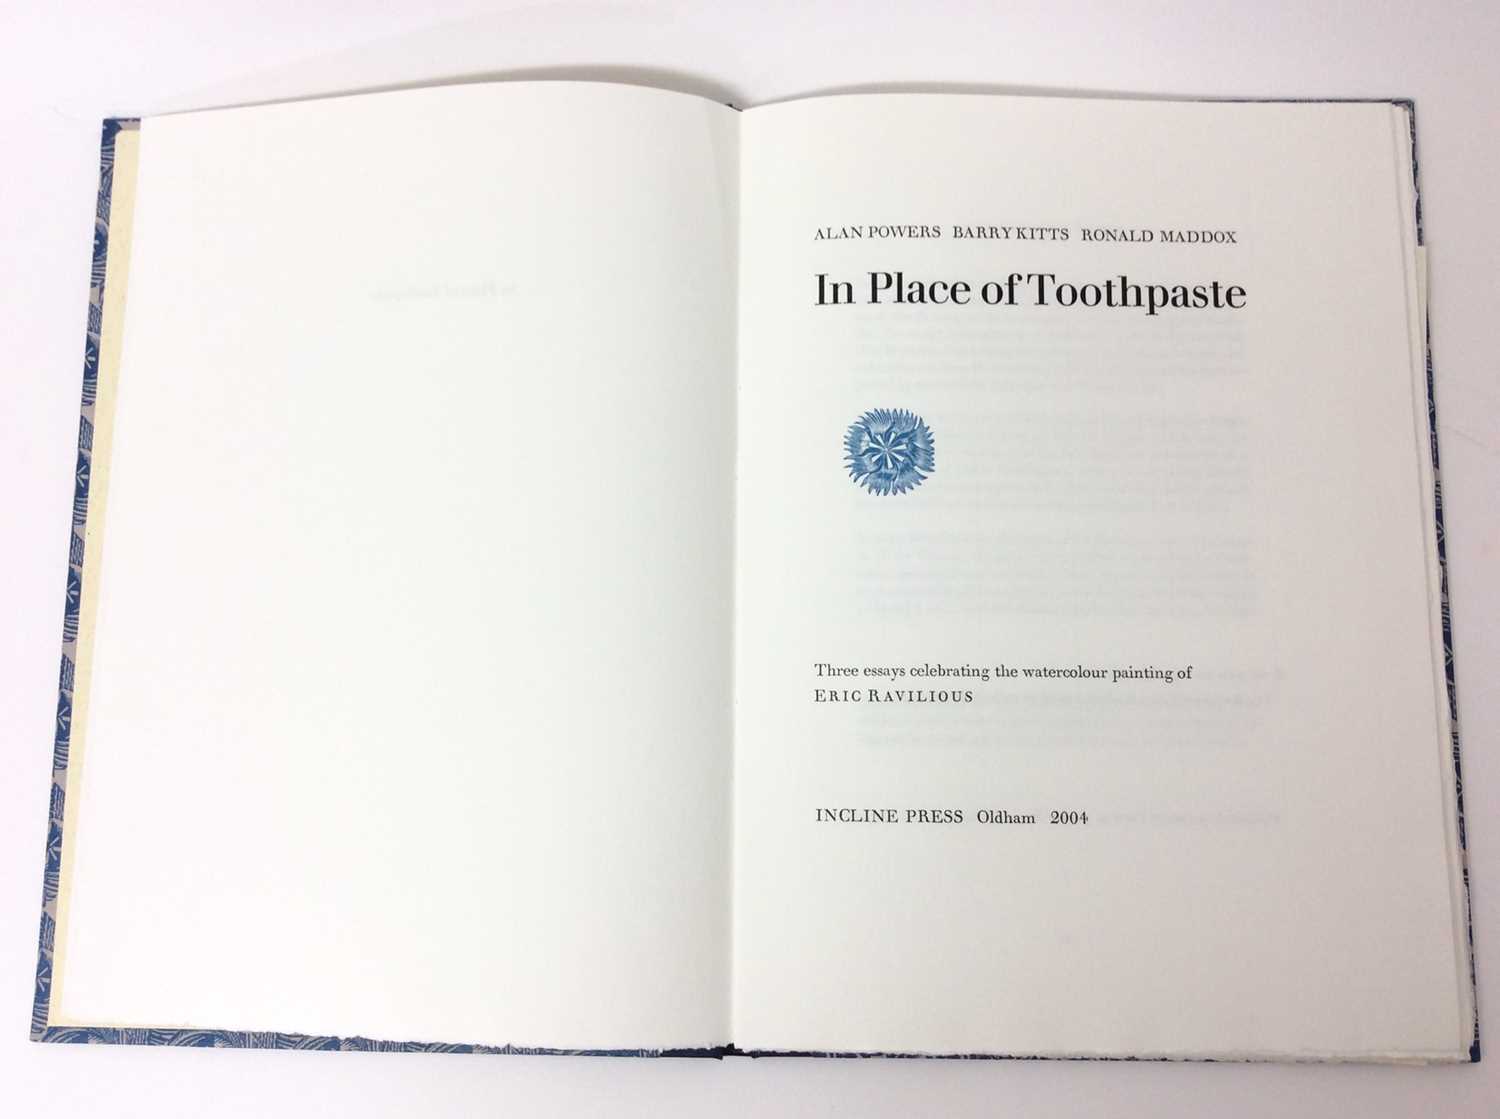 Alan Powers, Barry Kitts, Ronald Maddox - In Place of Toothpaste, Incline Press, 2004 - Image 2 of 6